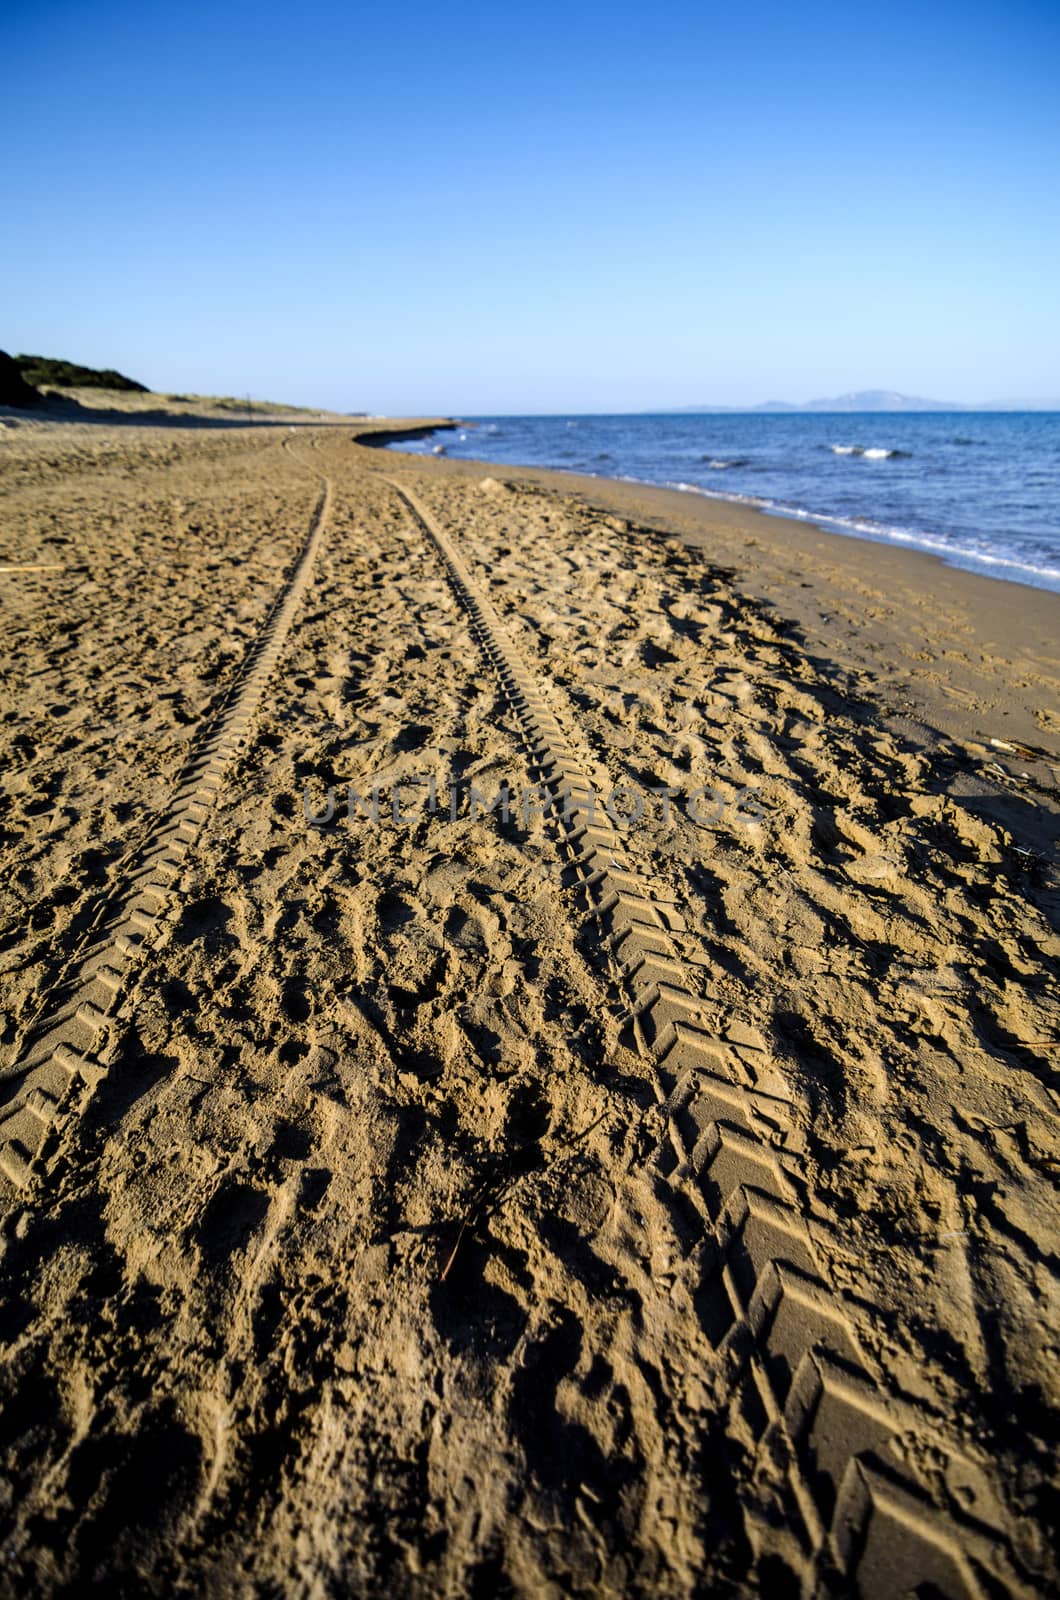 Tyre tracks by Anzemulec